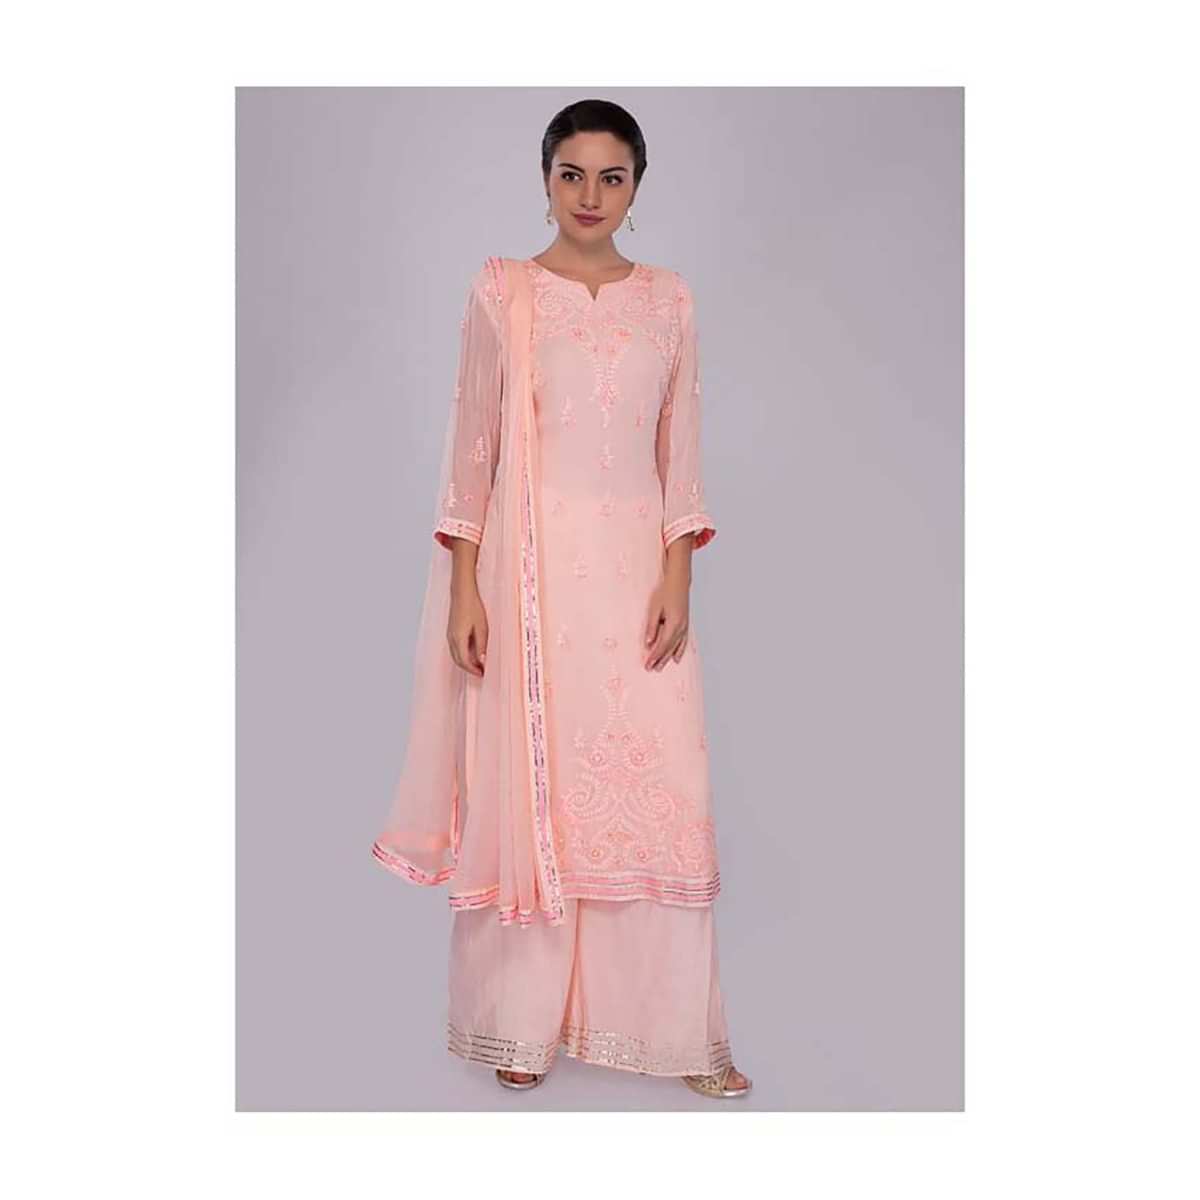 Light Peach Suit Set In Self Thread Embroidered Butti And Border Online - Kalki Fashion